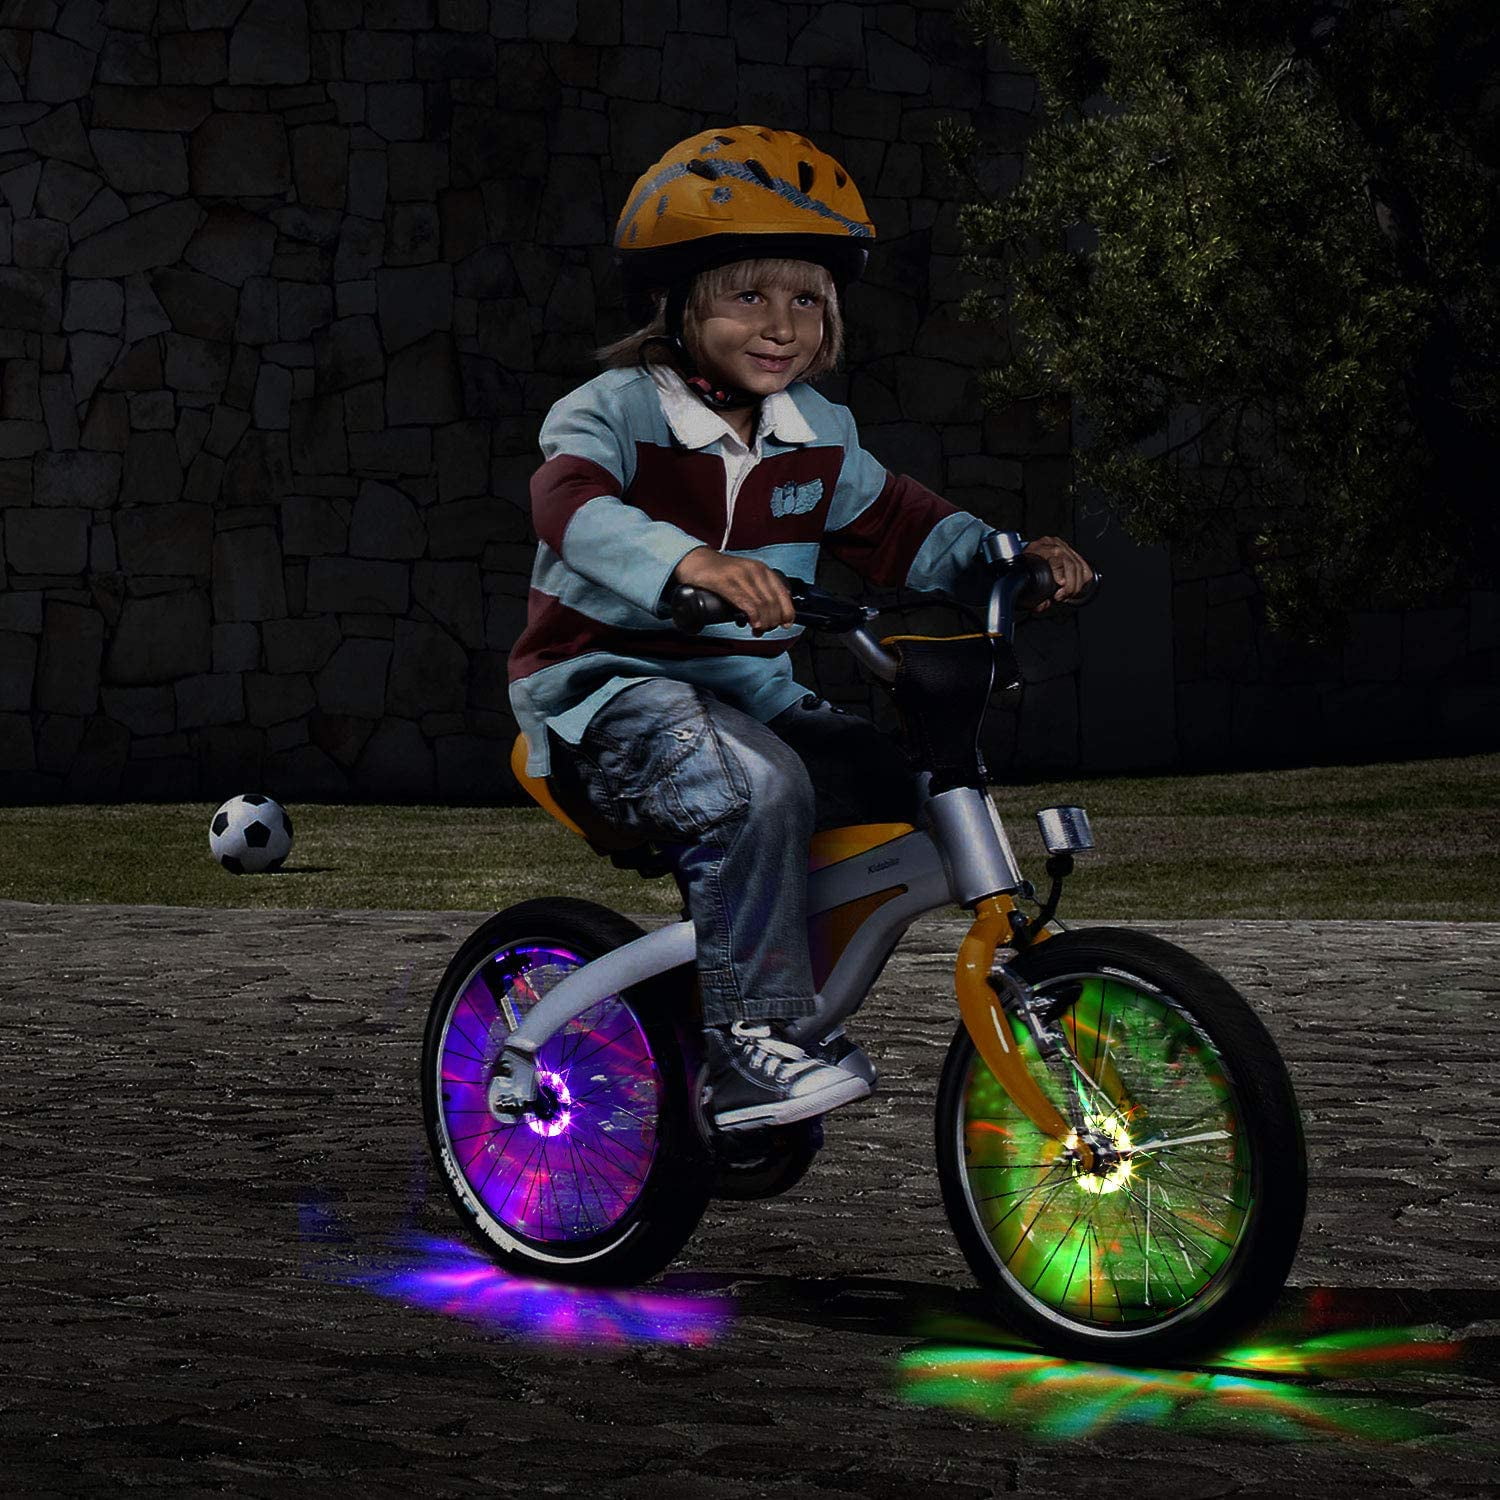 Bike Wheel Hub Lights USB Rechargeable Waterproof LED Cycling Lights Colorful Bicycle Spoke Lights for Child Balance Bike Safety Riding Warning and Decoration 